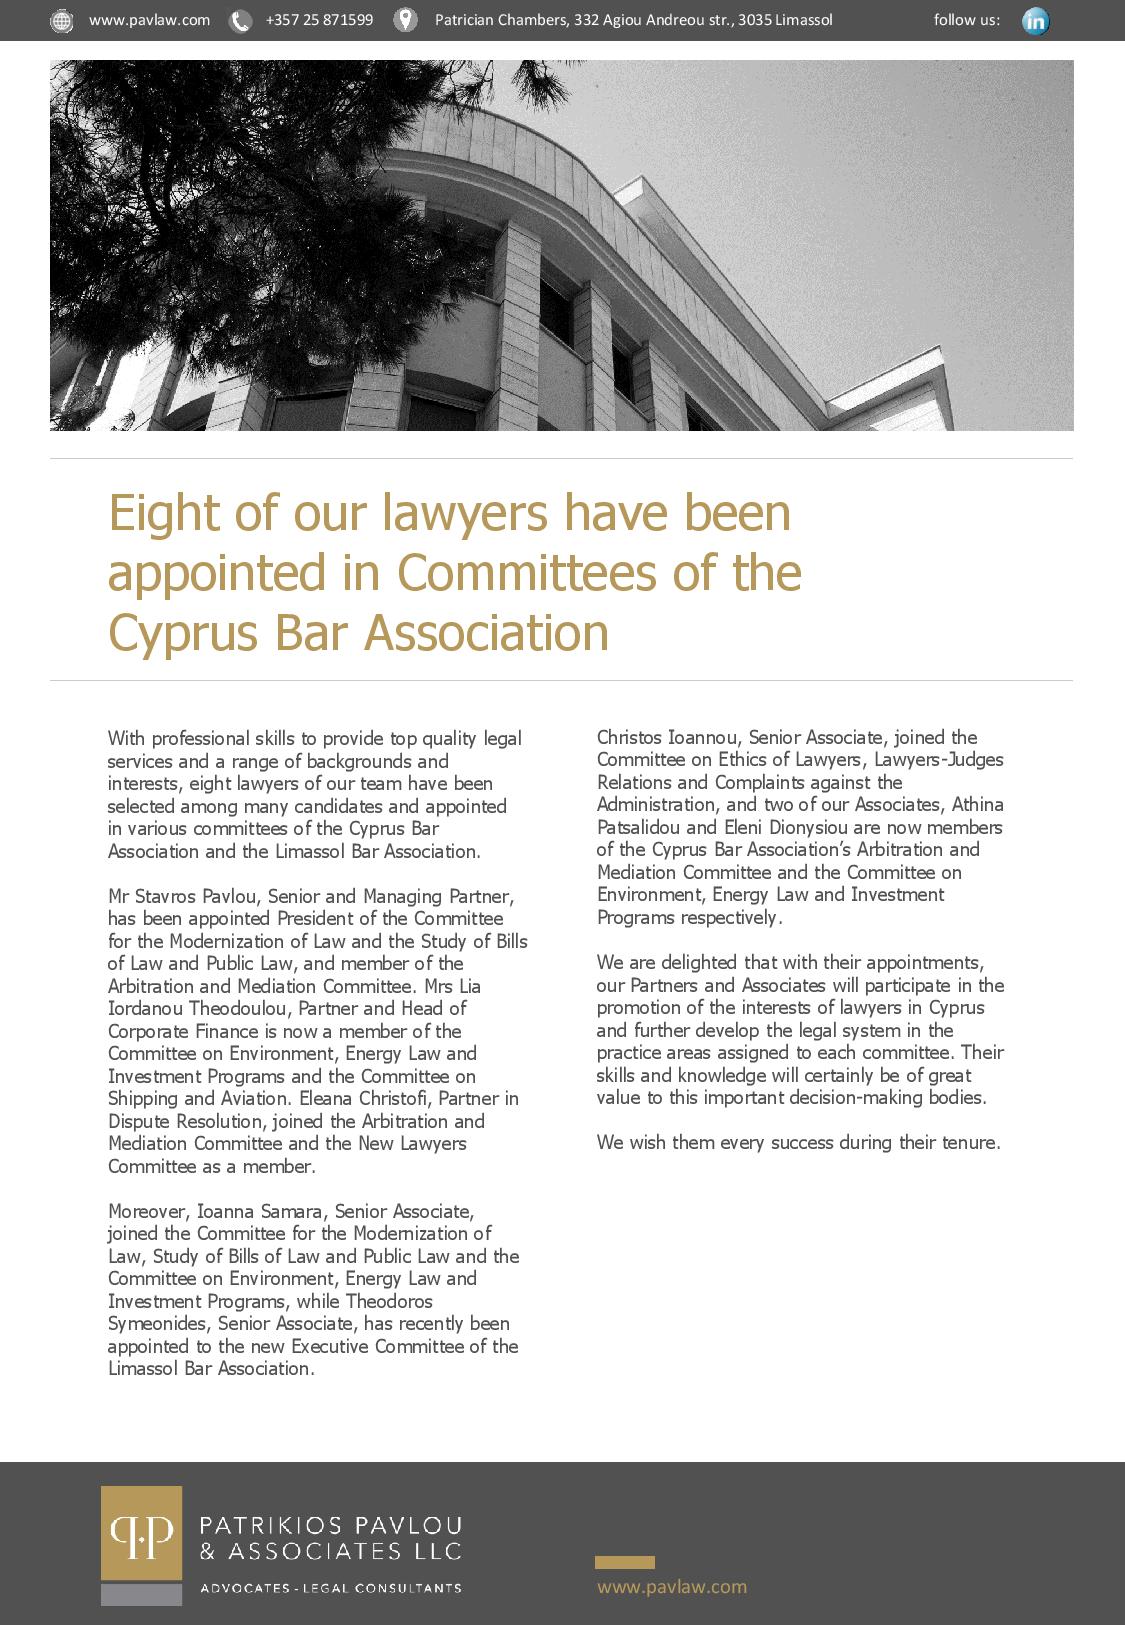 Patrikios Pavlou & Associates LLC News: Eight of our lawyers have been appointed in Committees of the Cyprus Bar Association